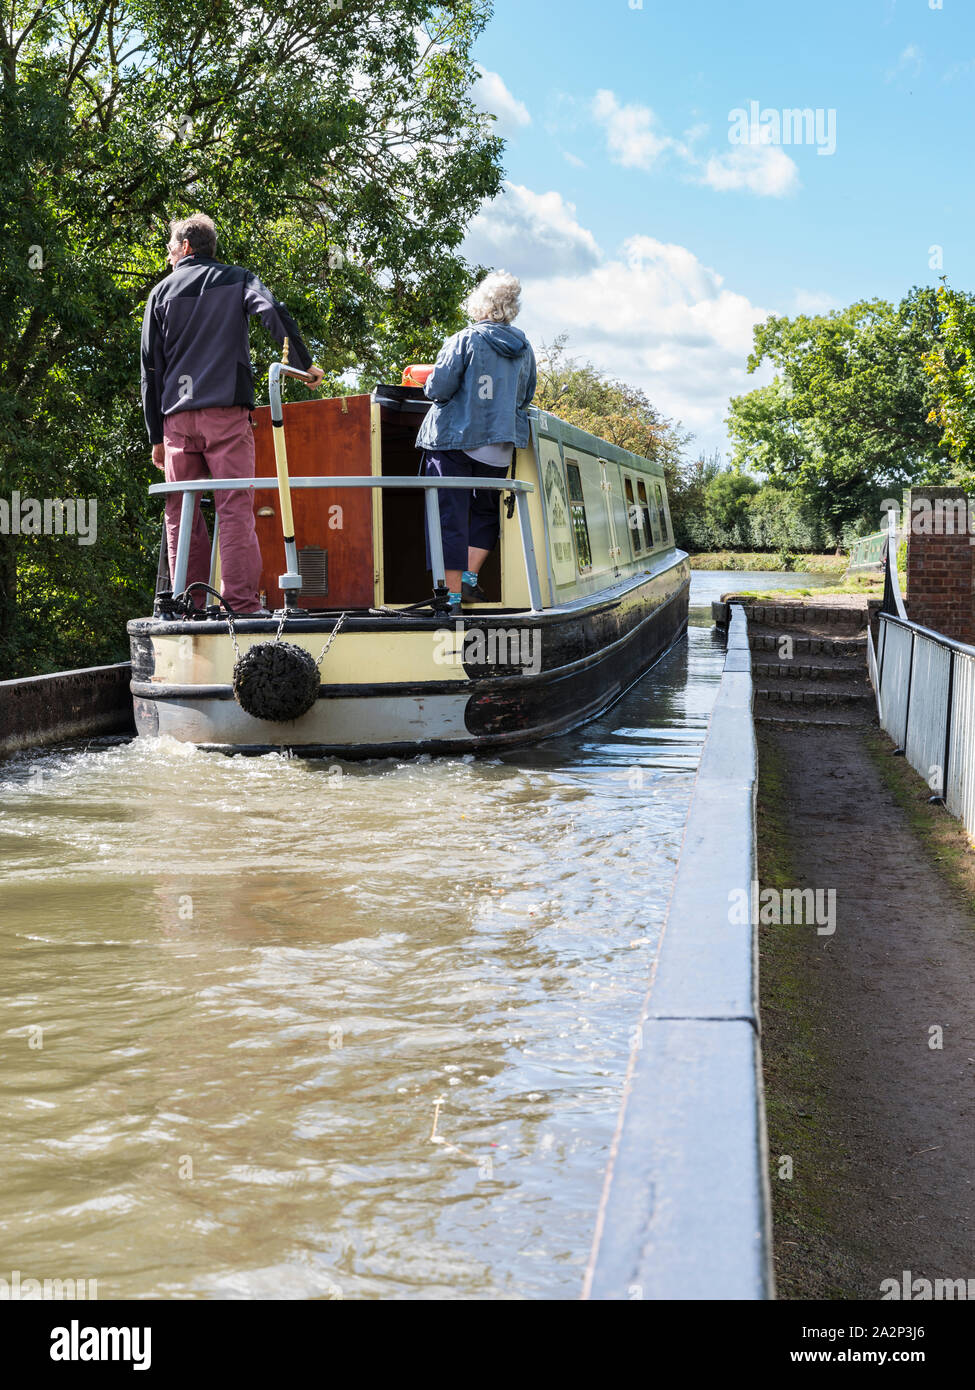 A leisure canal boat crossing the aqueduct on the Stratford on Avon canal. Stock Photo